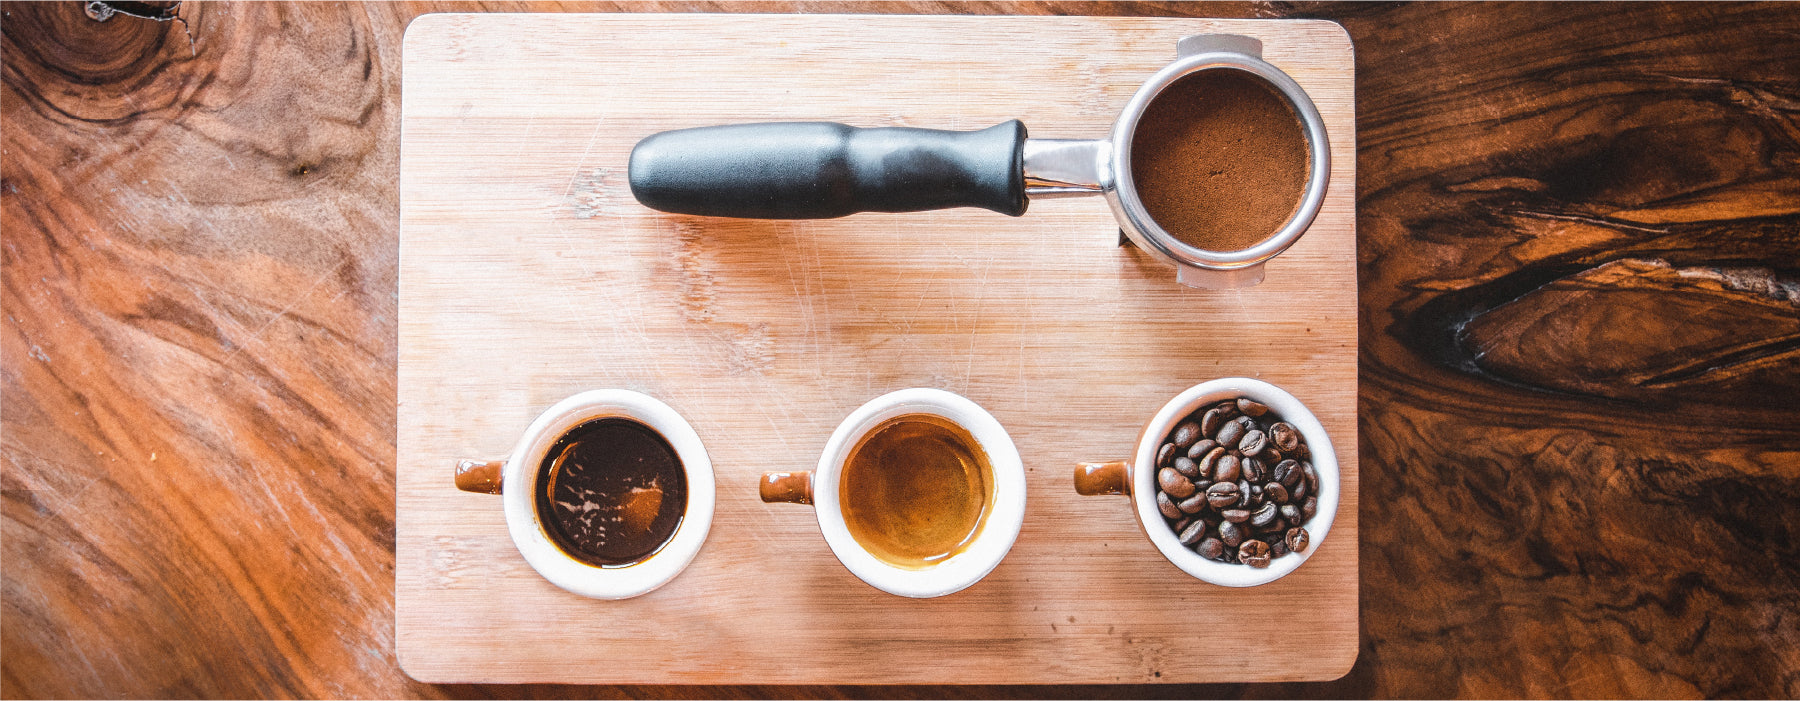 Weighing Espresso Shots in Service: Should You Do It? - Perfect